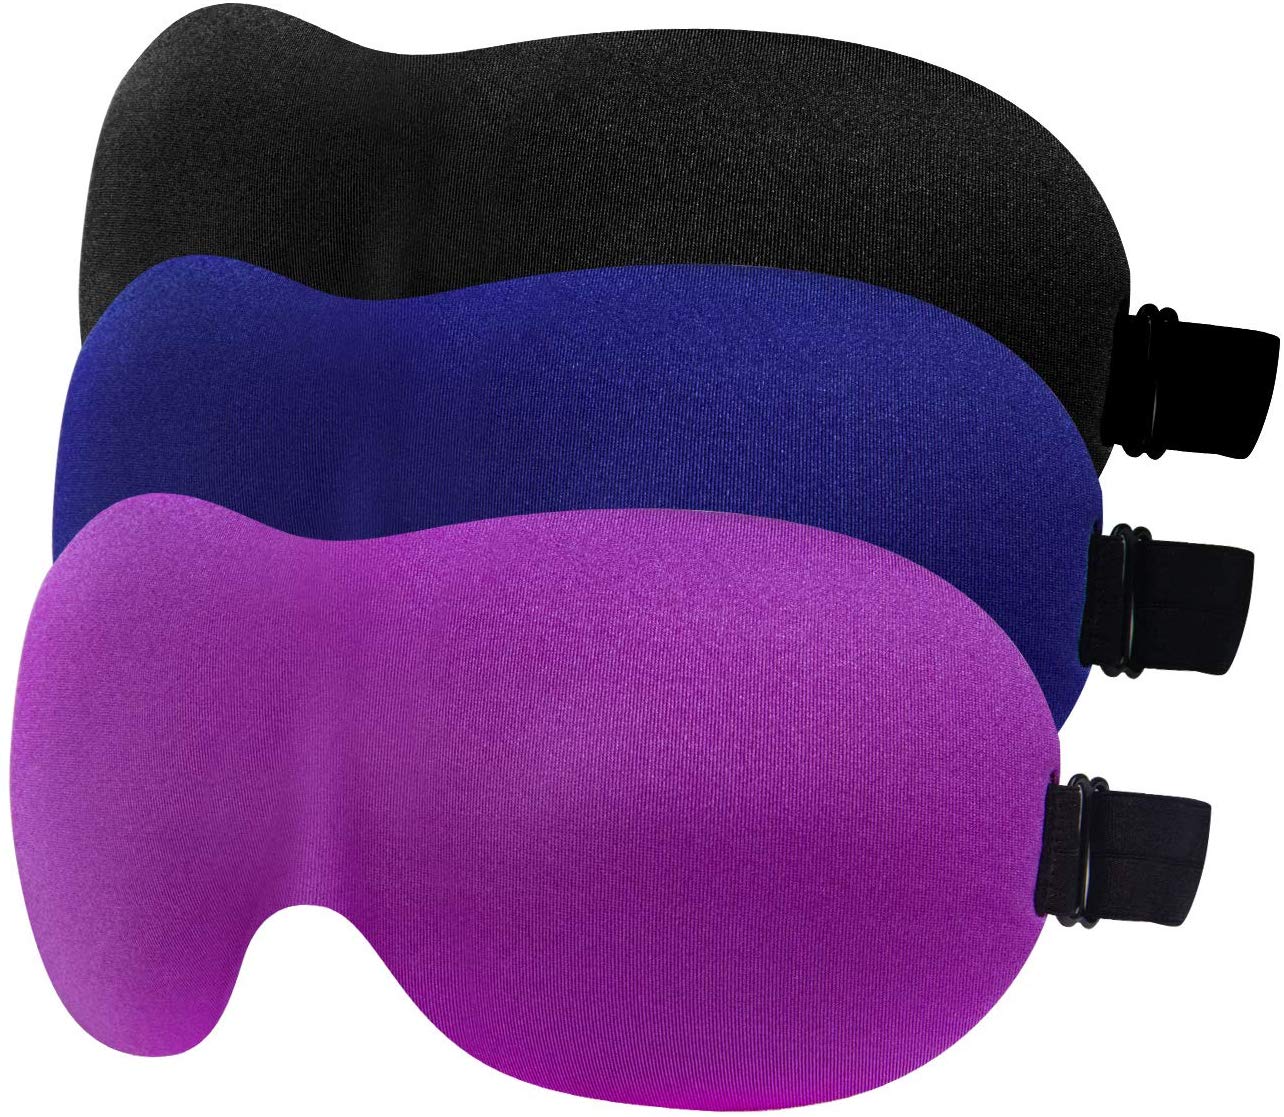 YIVIEW Flexible Smooth Sleeping Masks, 3-Pack